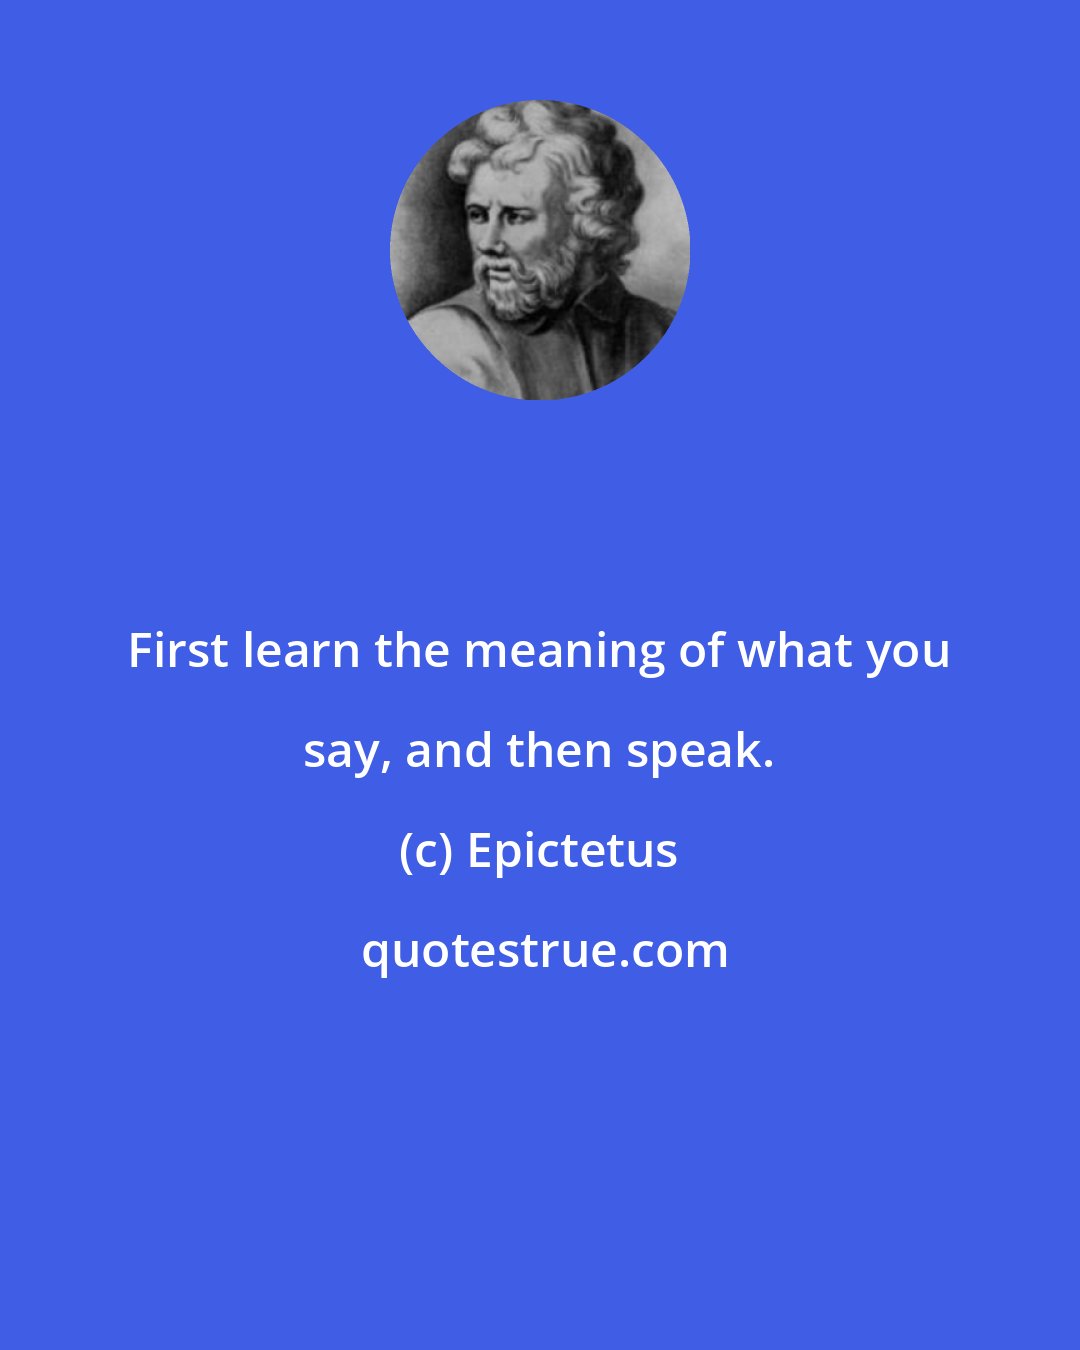 Epictetus: First learn the meaning of what you say, and then speak.